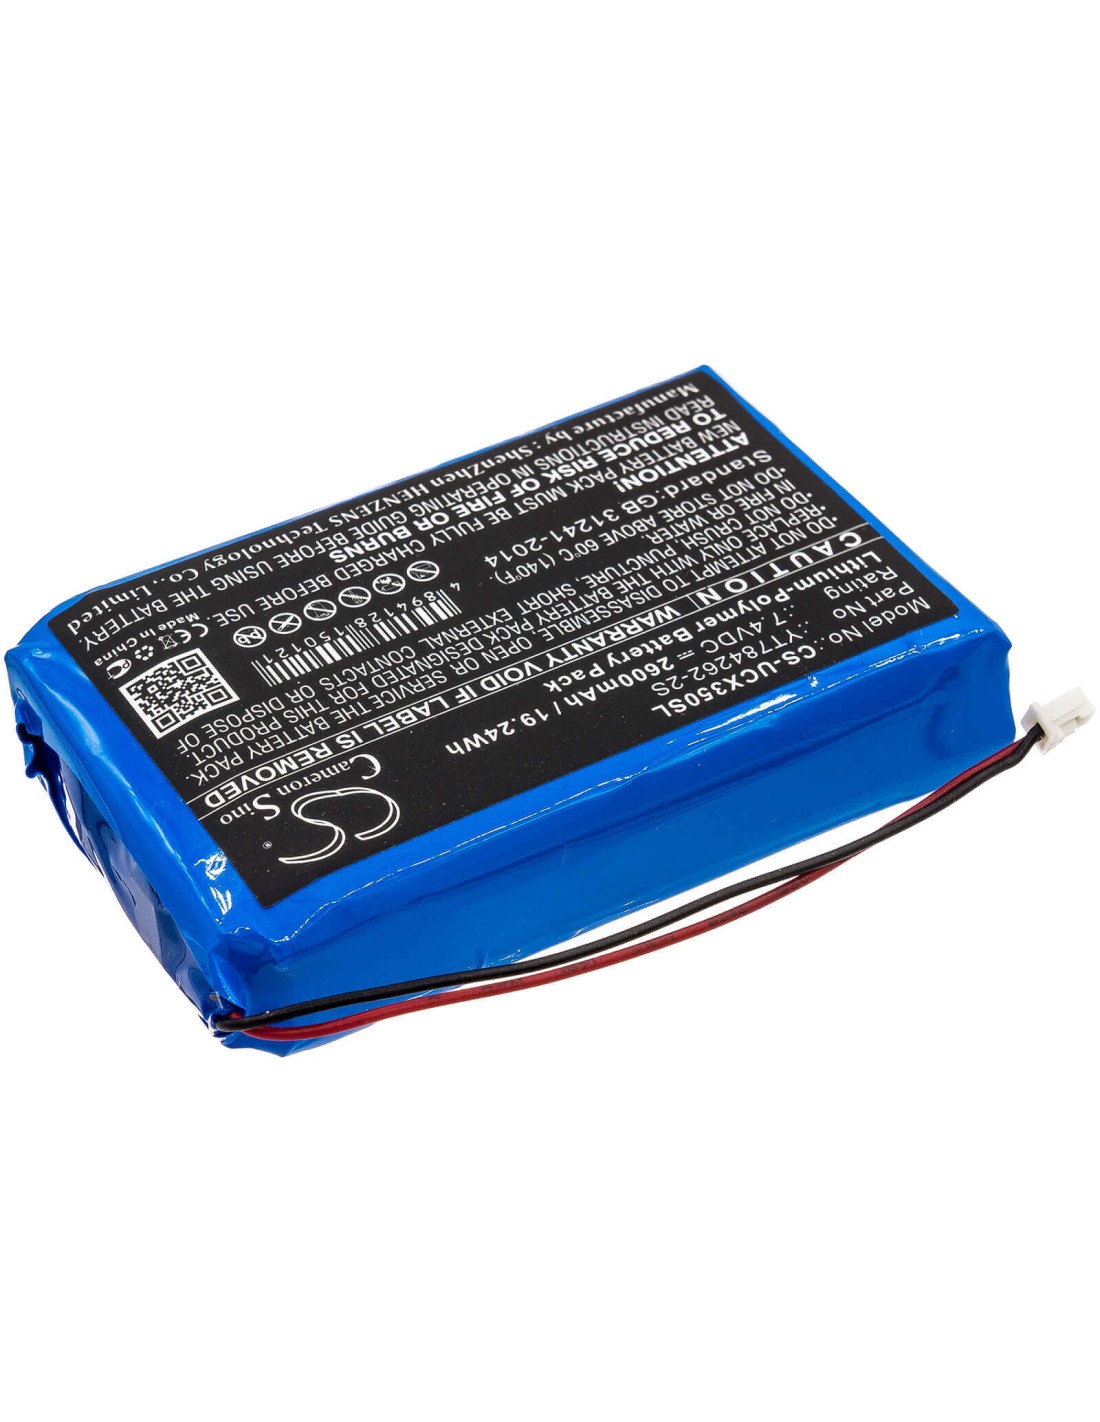 Battery for Uniwell, Cx3500 7.4V, 2600mAh - 19.24Wh